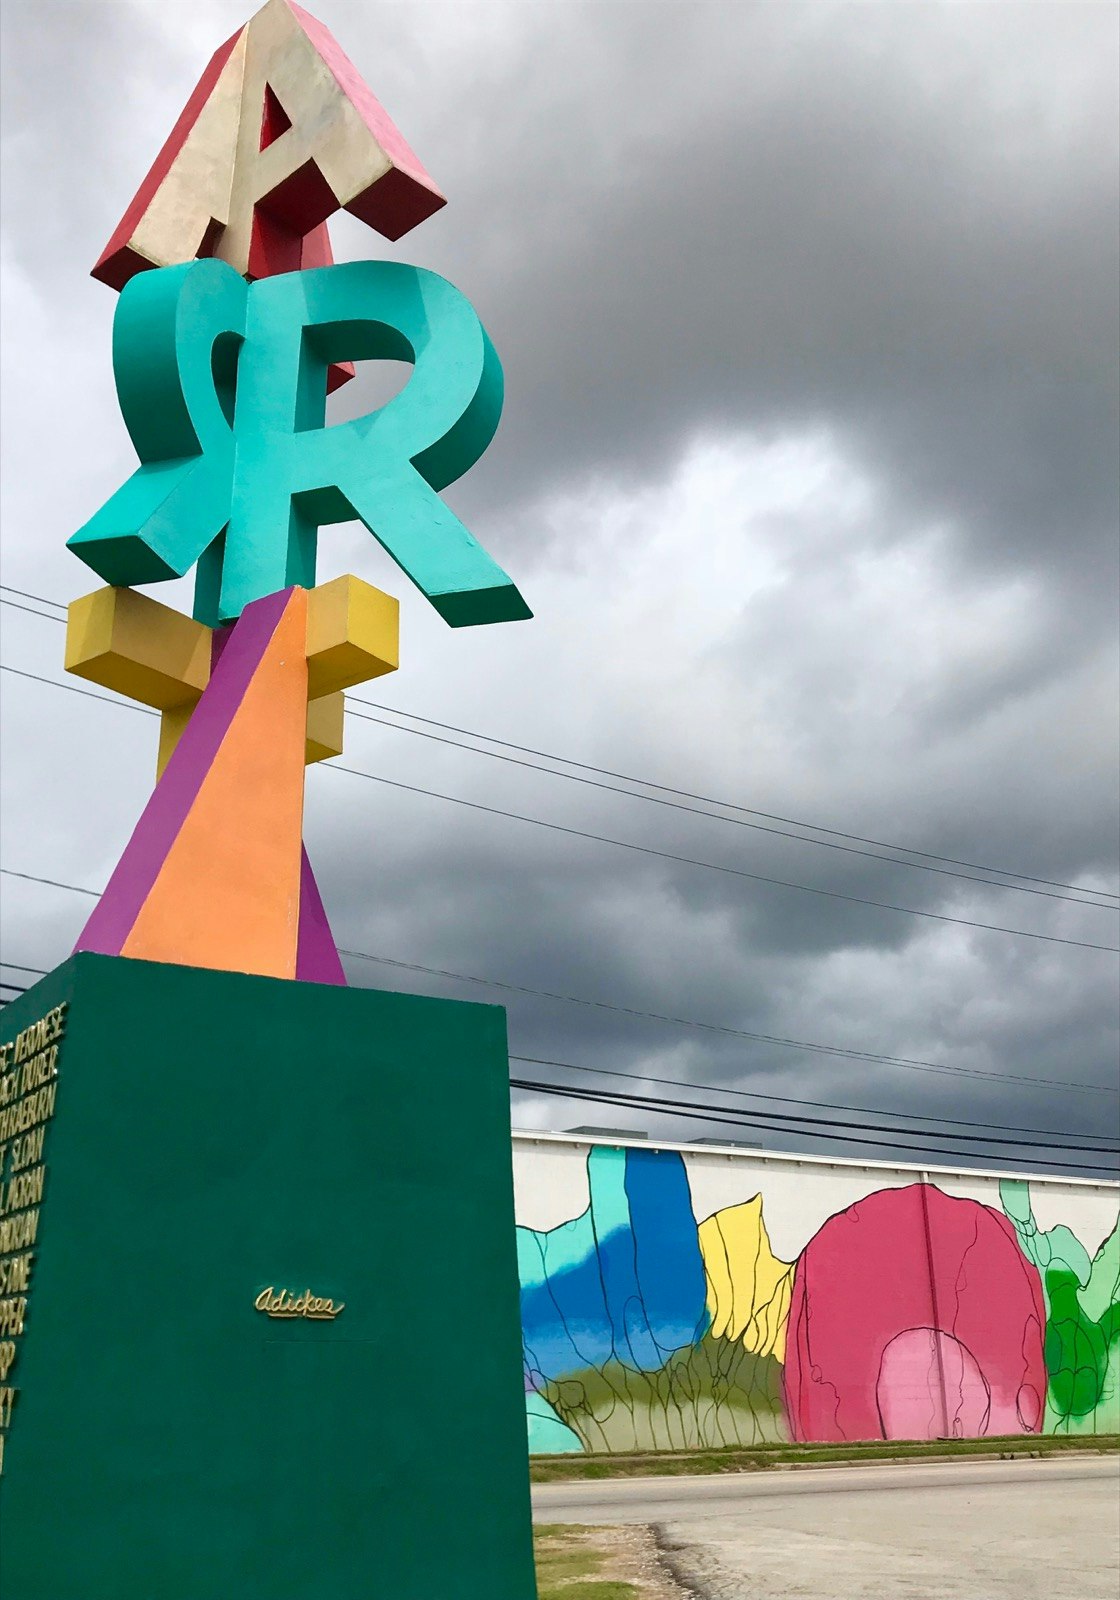 A column of stylized letters spelling 'Art' stands in front of a cloudy gray sky and colorful mural © Lisa Dunford / Lonely Planet